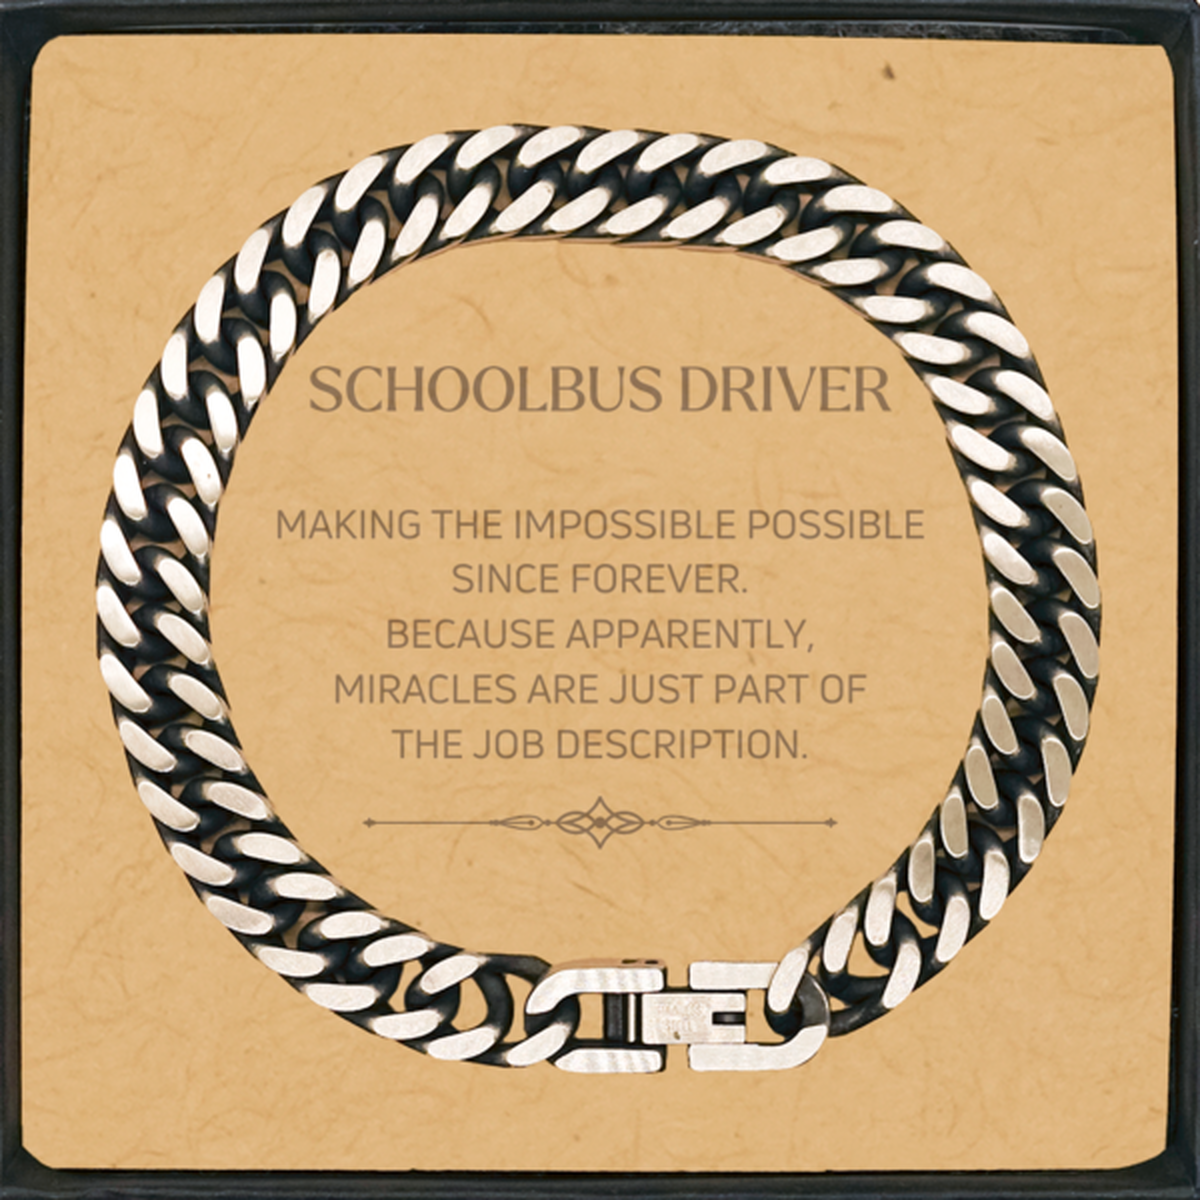 Funny Schoolbus Driver Gifts, Miracles are just part of the job description, Inspirational Birthday Cuban Link Chain Bracelet For Schoolbus Driver, Men, Women, Coworkers, Friends, Boss